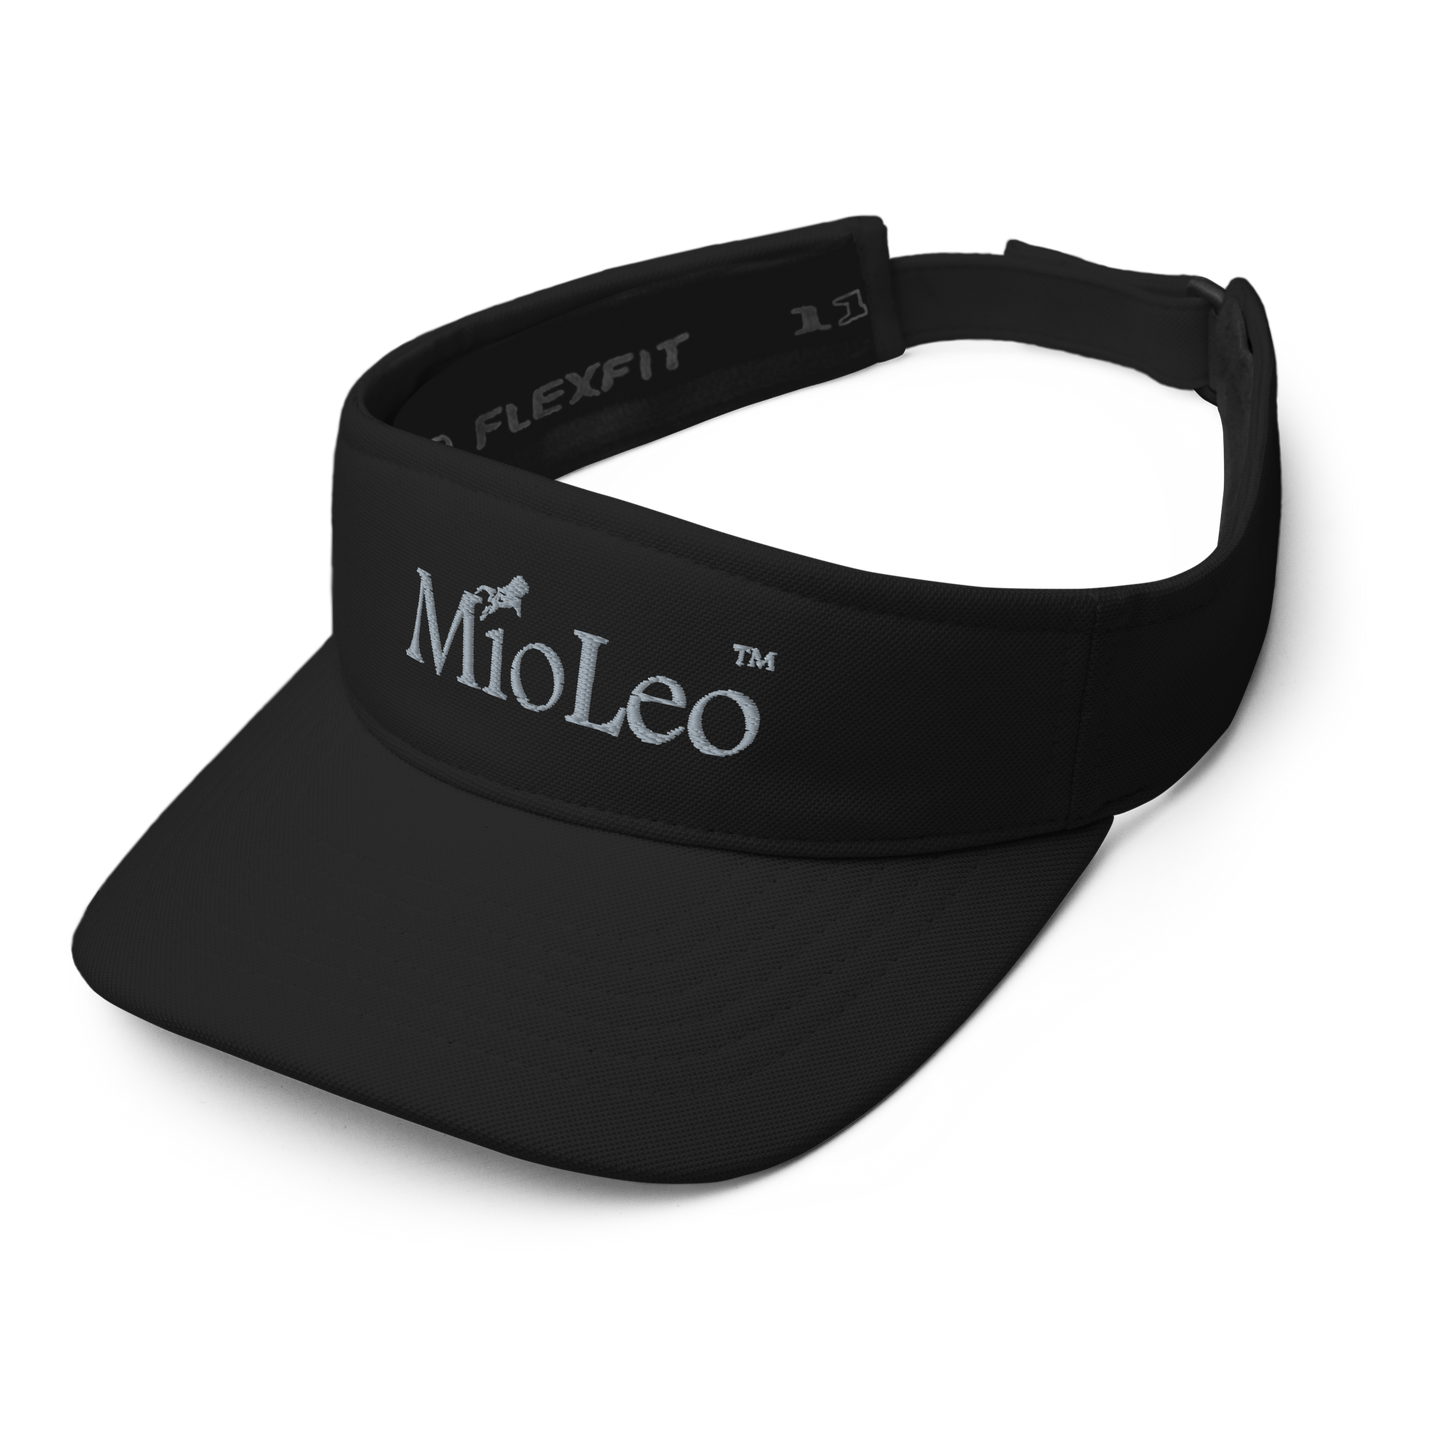 Visor White-Line No.553 "unlimited" by MioLeo